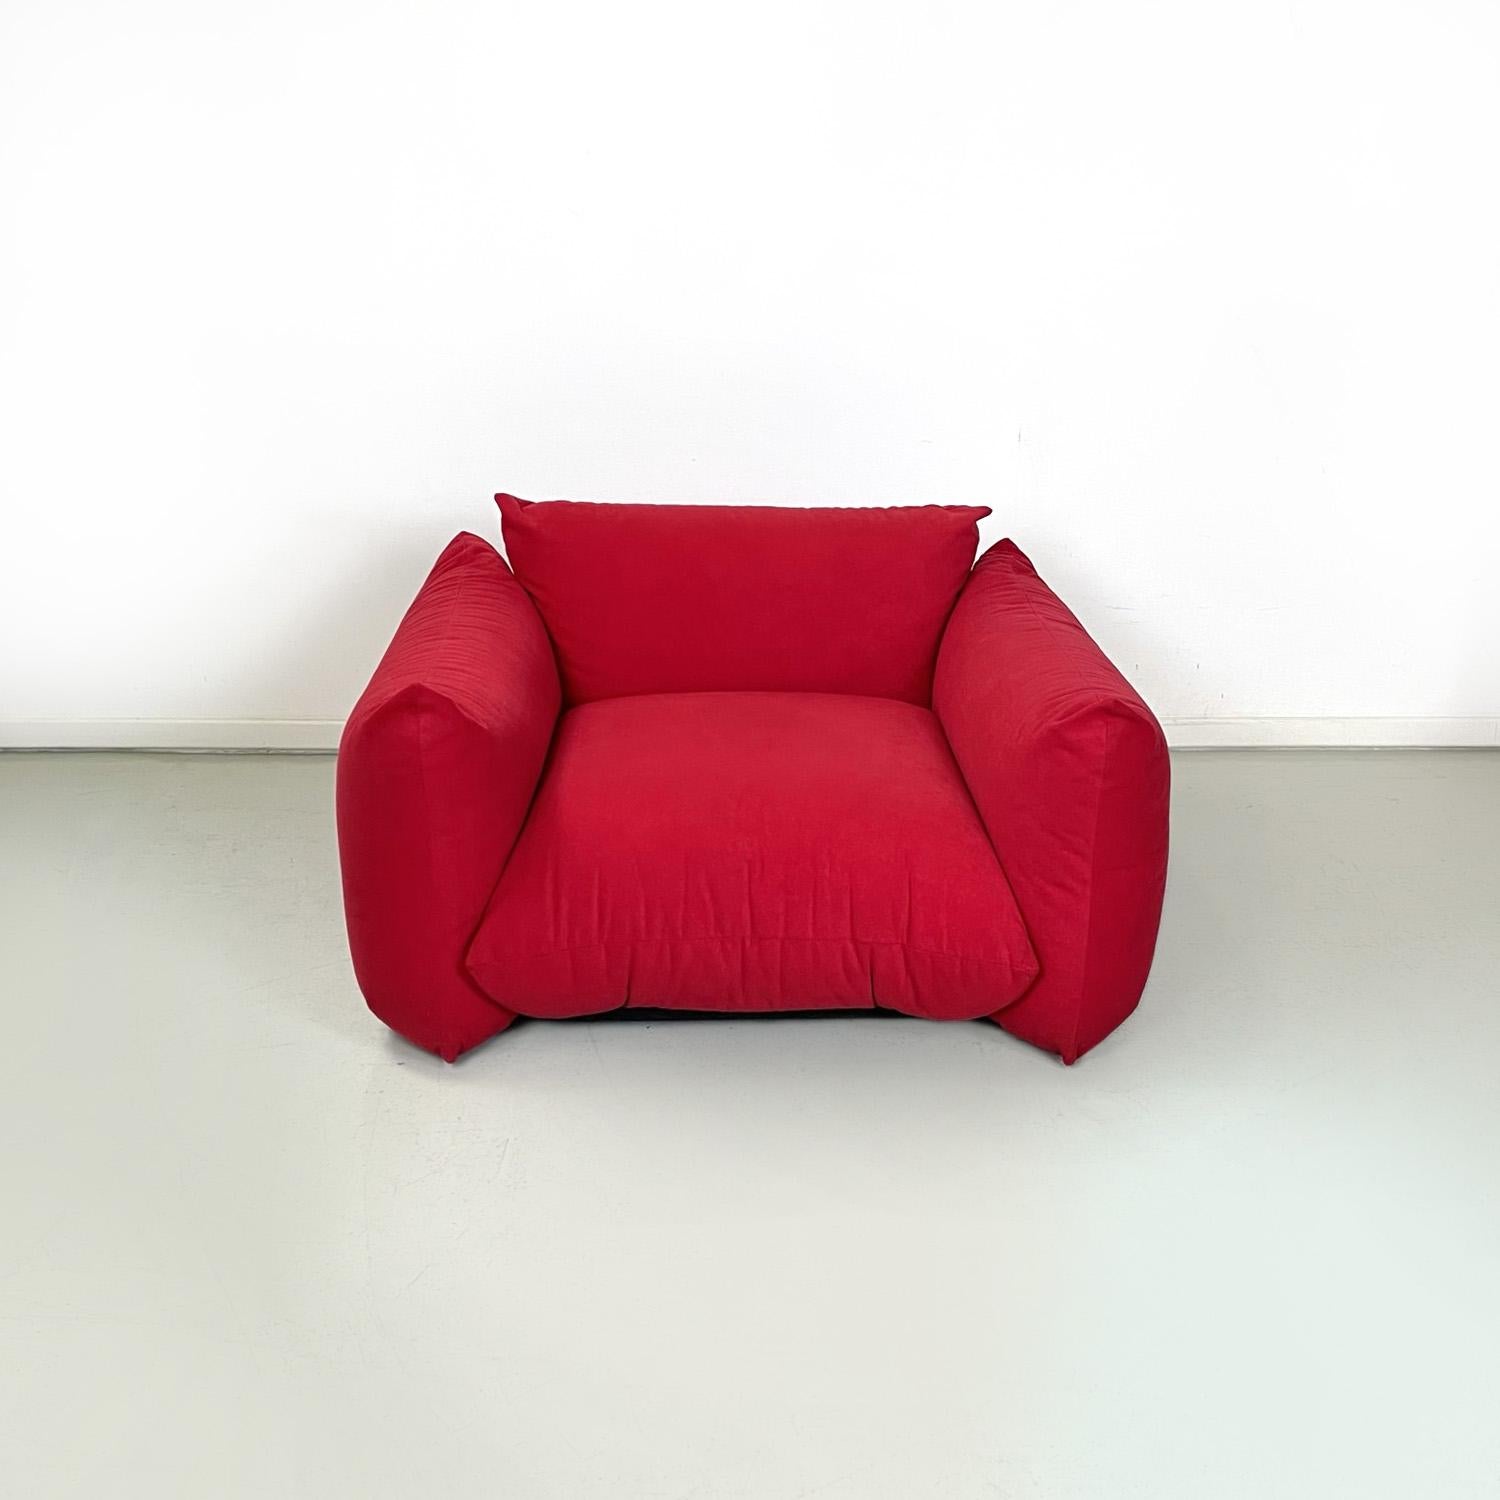 Italian modern red armchair Marenco by Mario Marenco for Arflex, 1970s
Square shaped armchair mod. Marenco. The seat and backrest are composed of two padded cushions covered in red alcantara type fabric, as are the two armrests.
Produced by Arflex